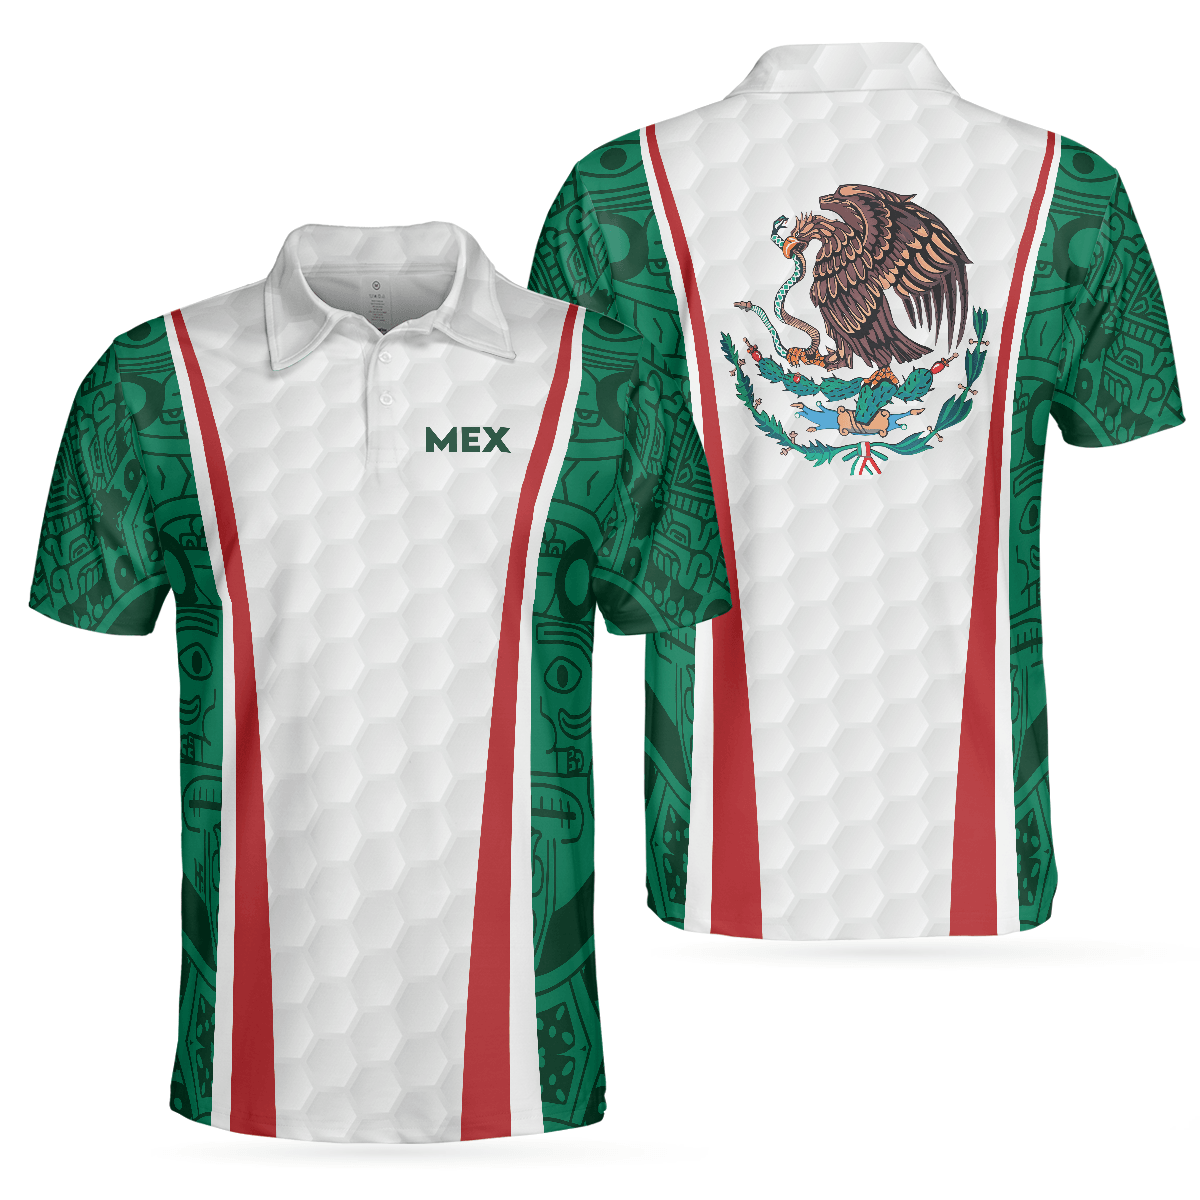 Golf Mexico Retro Men Polo Shirt, Best Golf Shirt Design For Mexican Lovers, Golf Gift Idea For Male Golfers - Amzanimalsgift